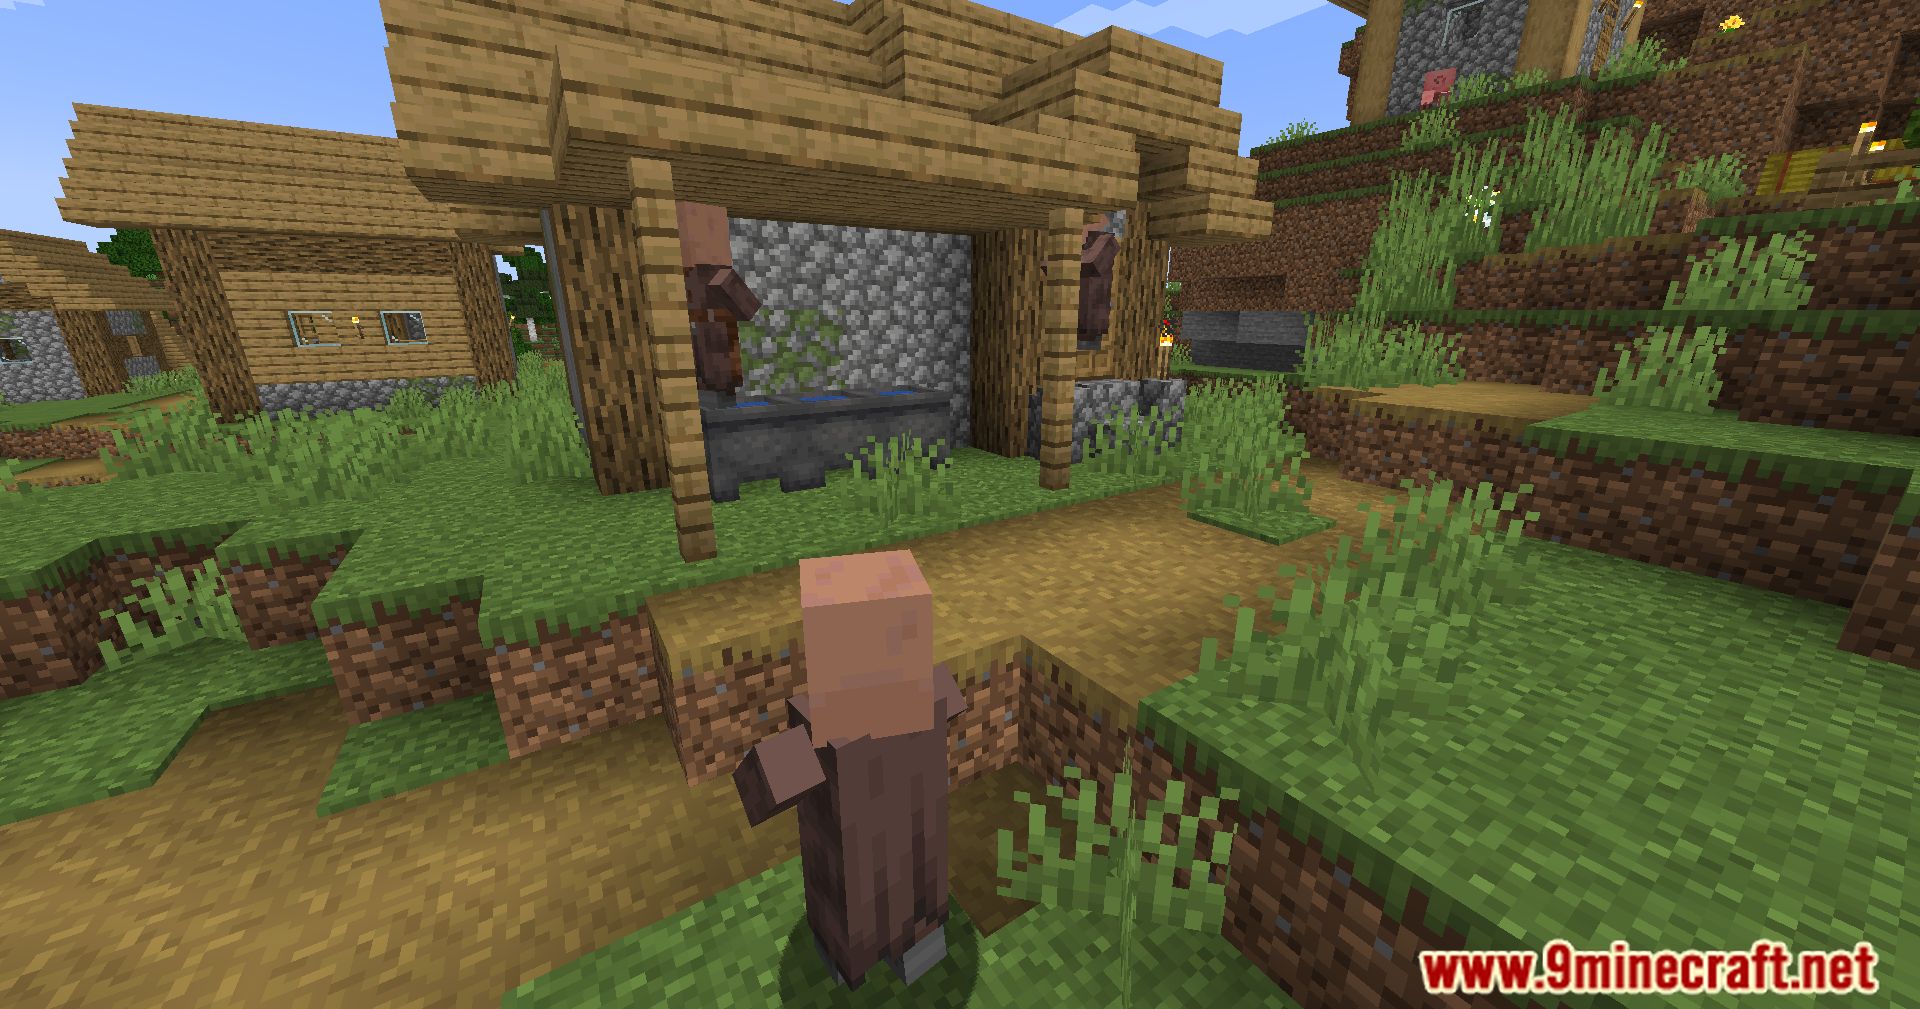 Friendly Griefing Mod (1.20.1, 1.19.4) - Configurable Control Over Griefing In Minecraft. 6